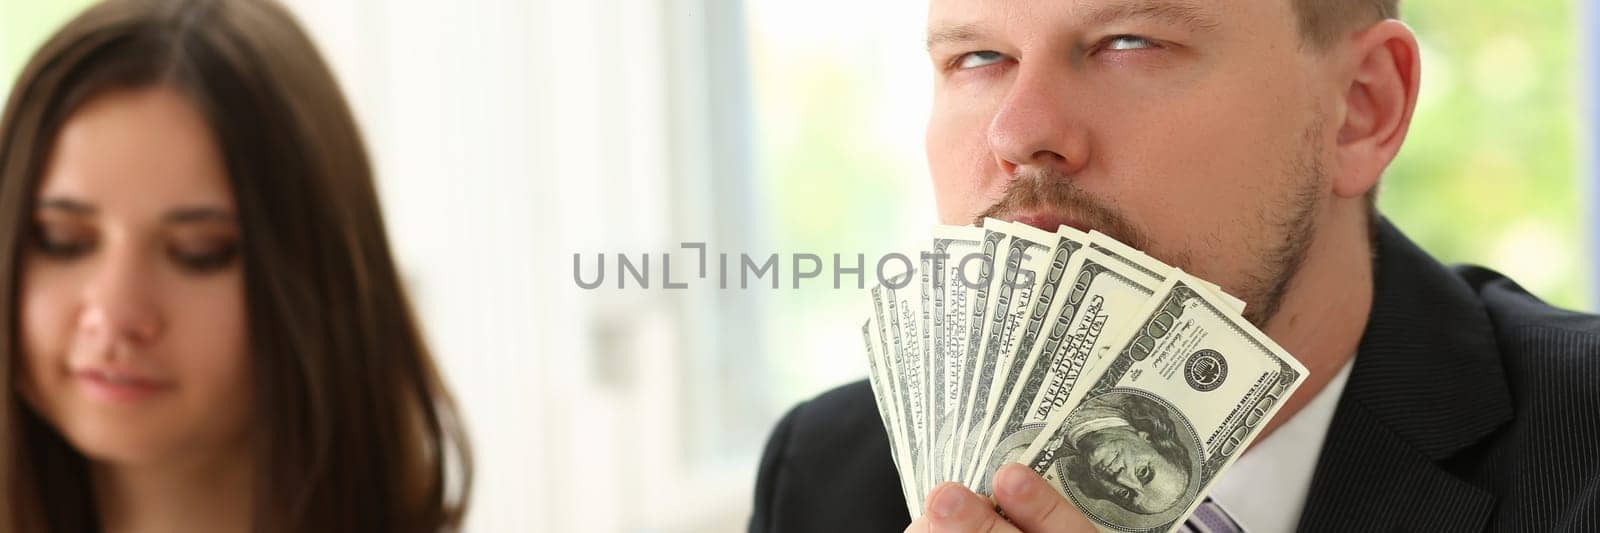 Man holds up dollars banknotes and enjoys success of financial income and growth by kuprevich